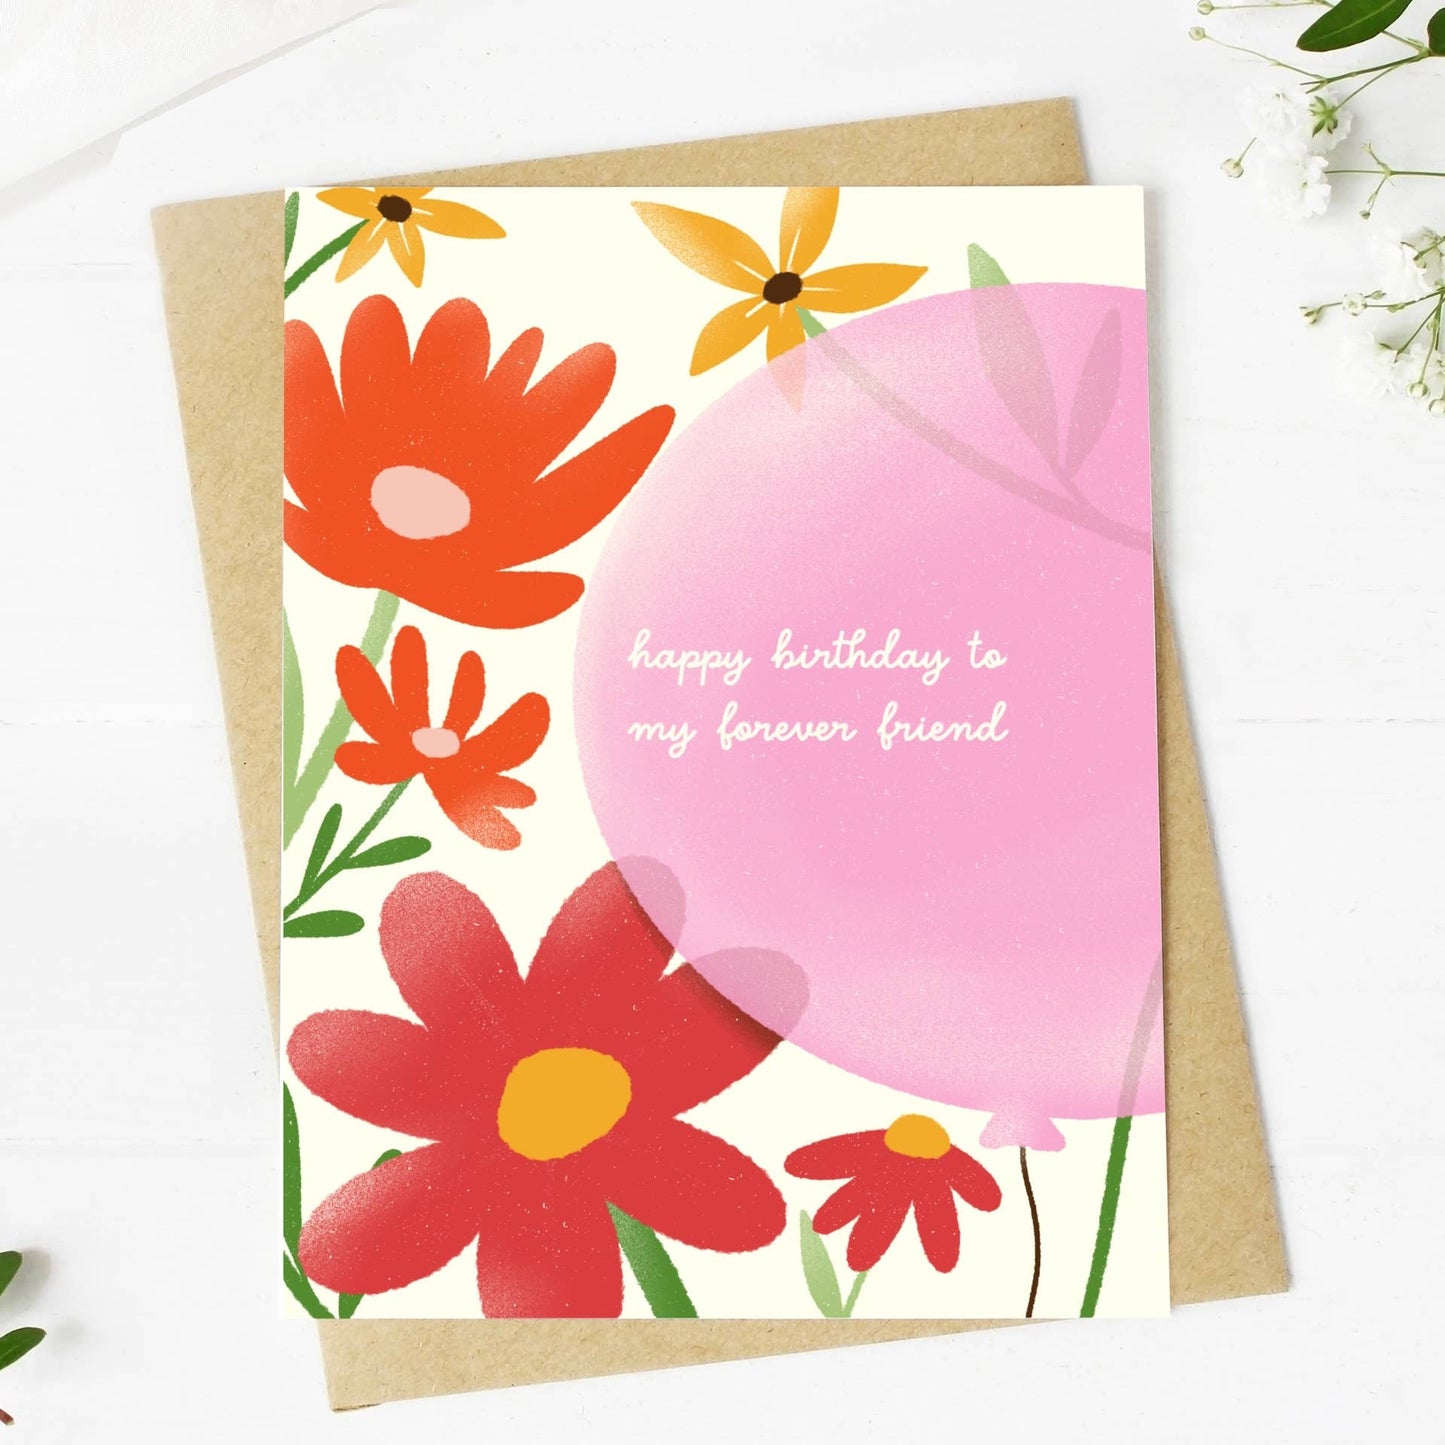 "Happy Birthday To My Forever Friend" Floral Greeting Card